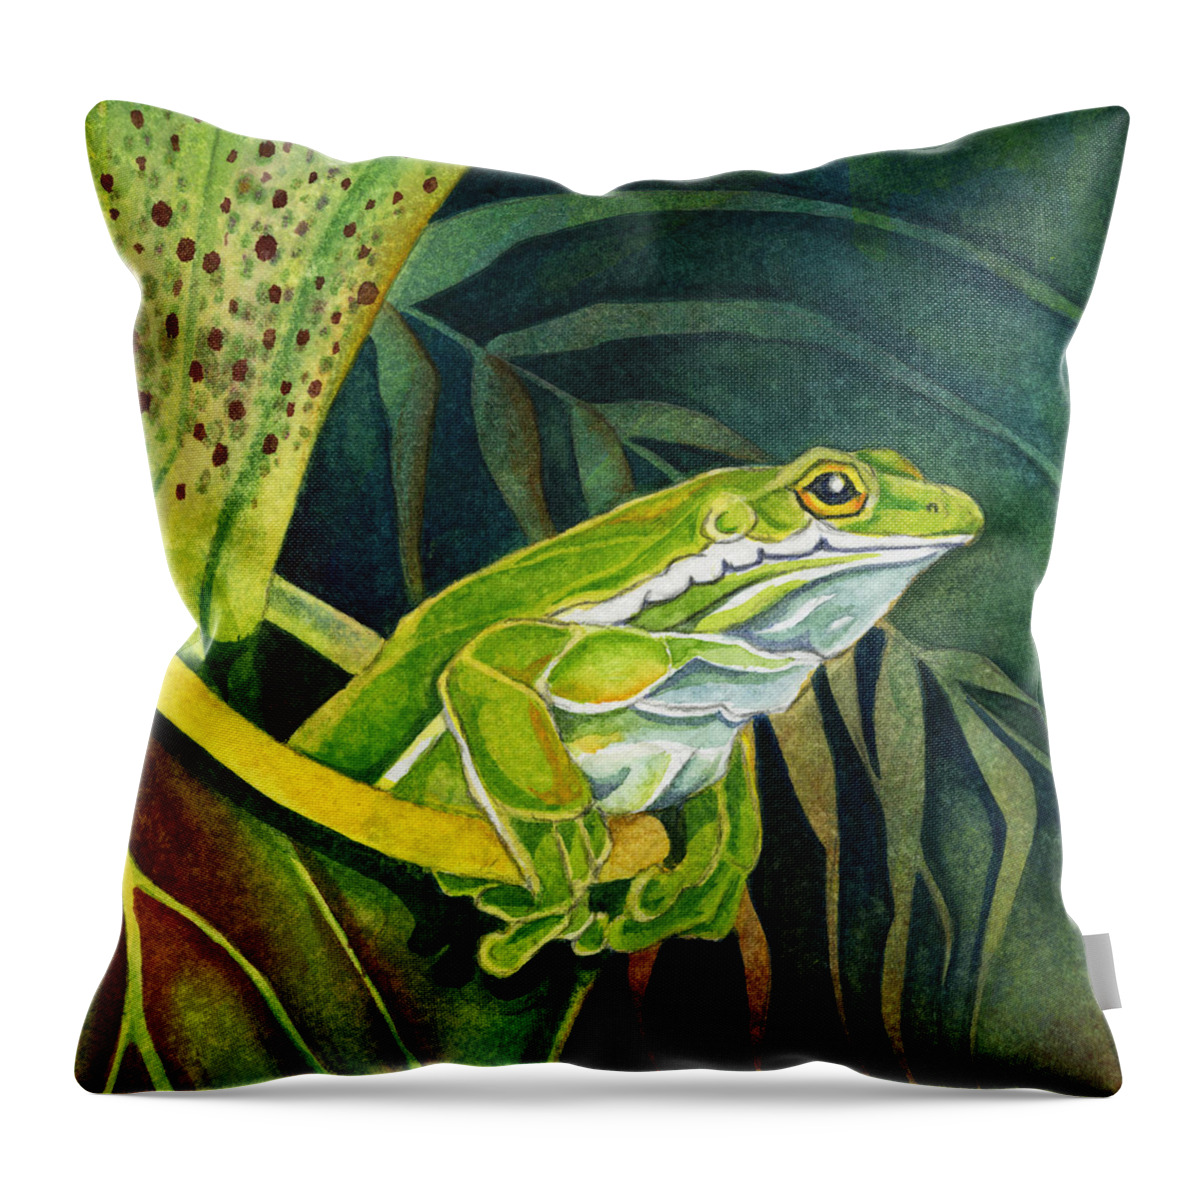  Throw Pillow featuring the painting Frog In Pitcher Plant by Lyse Anthony